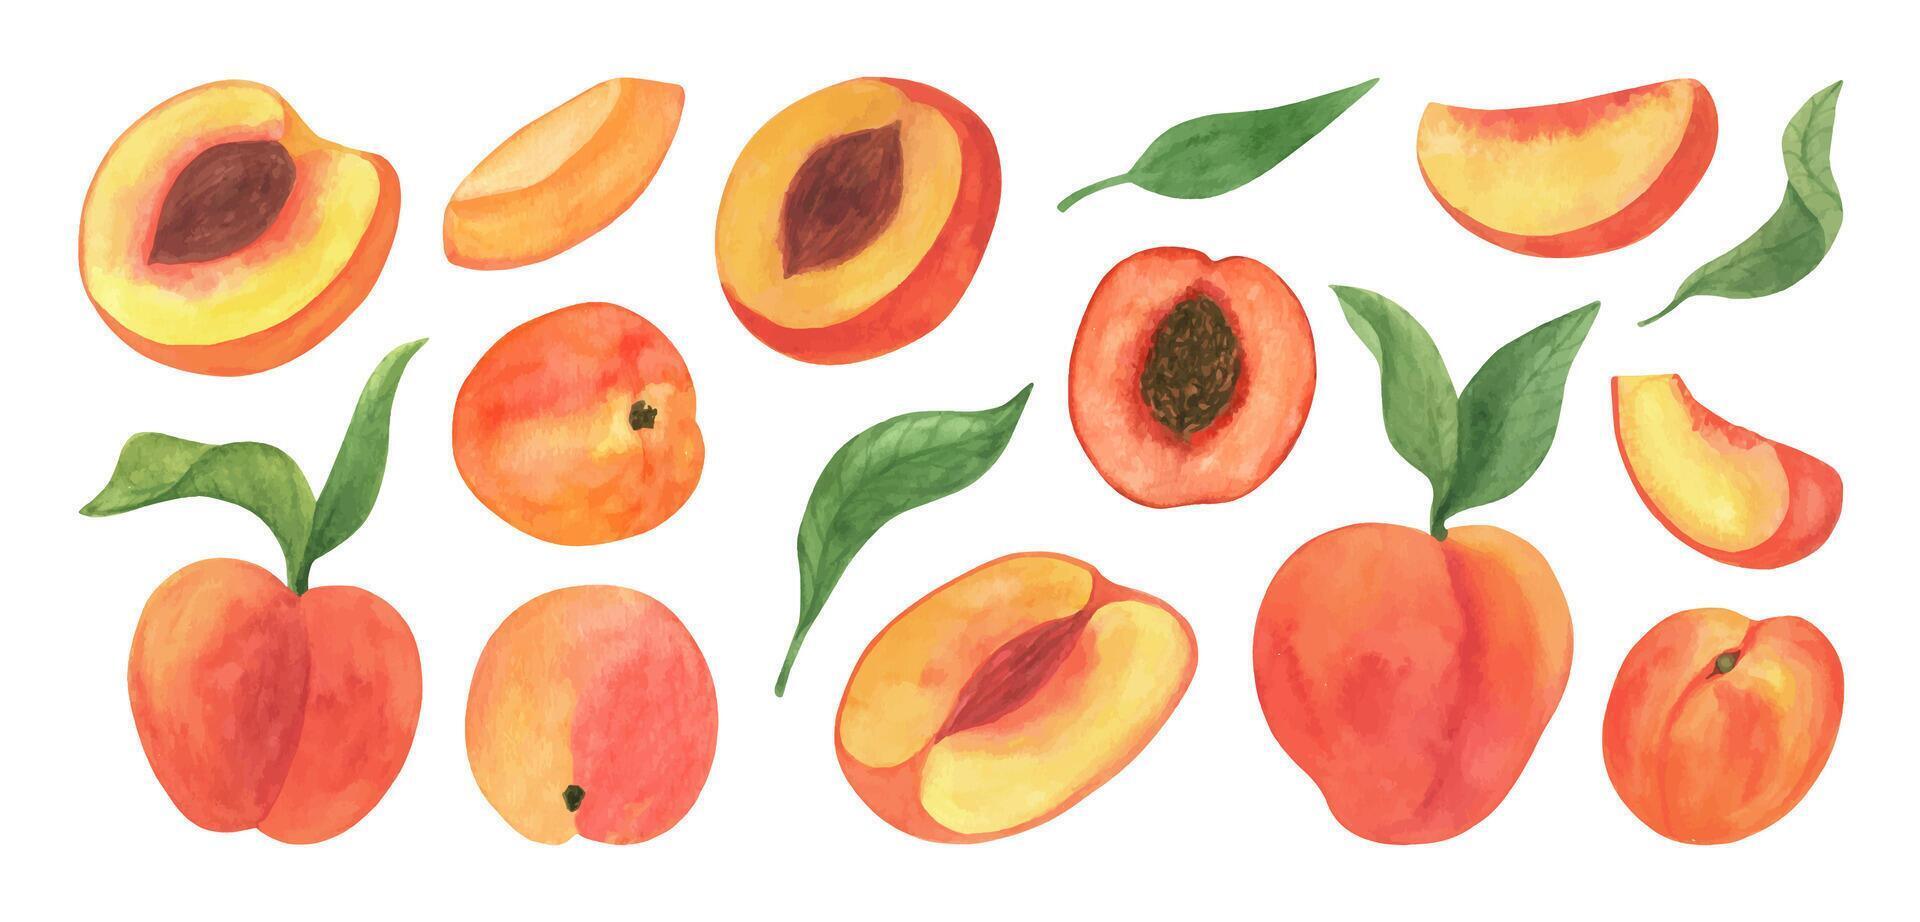 Cute peach fruit watercolor clipart, fresh summer fruit. Illustrations of peach branch with green leaves. Isolated on white background. vector